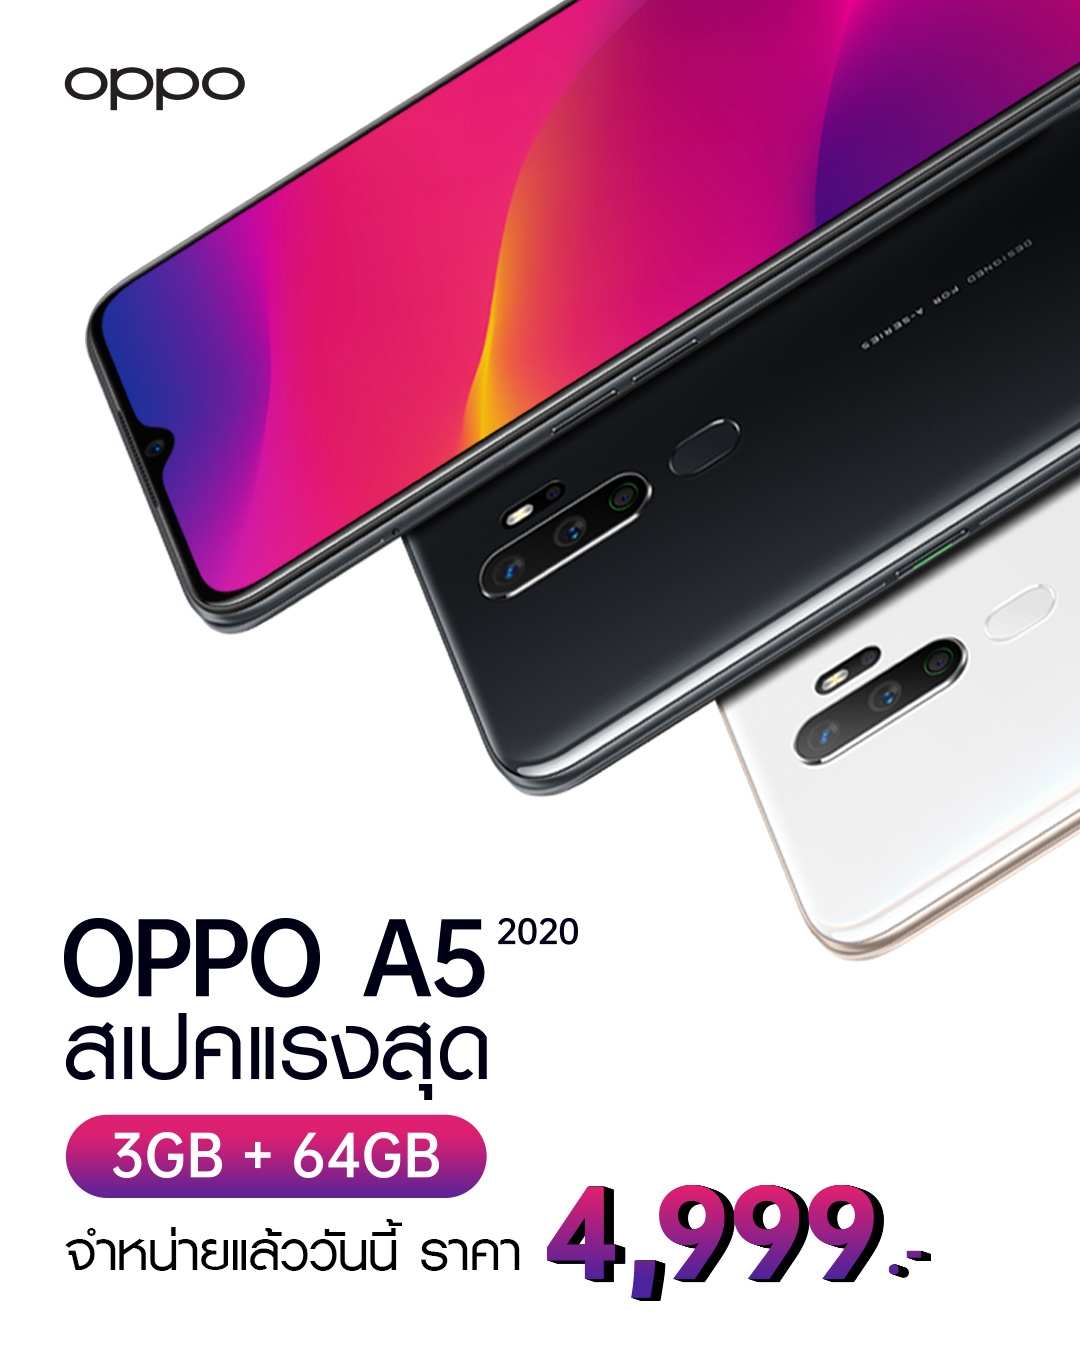 OPPO A9 2020 and OPPO A5 2020 News